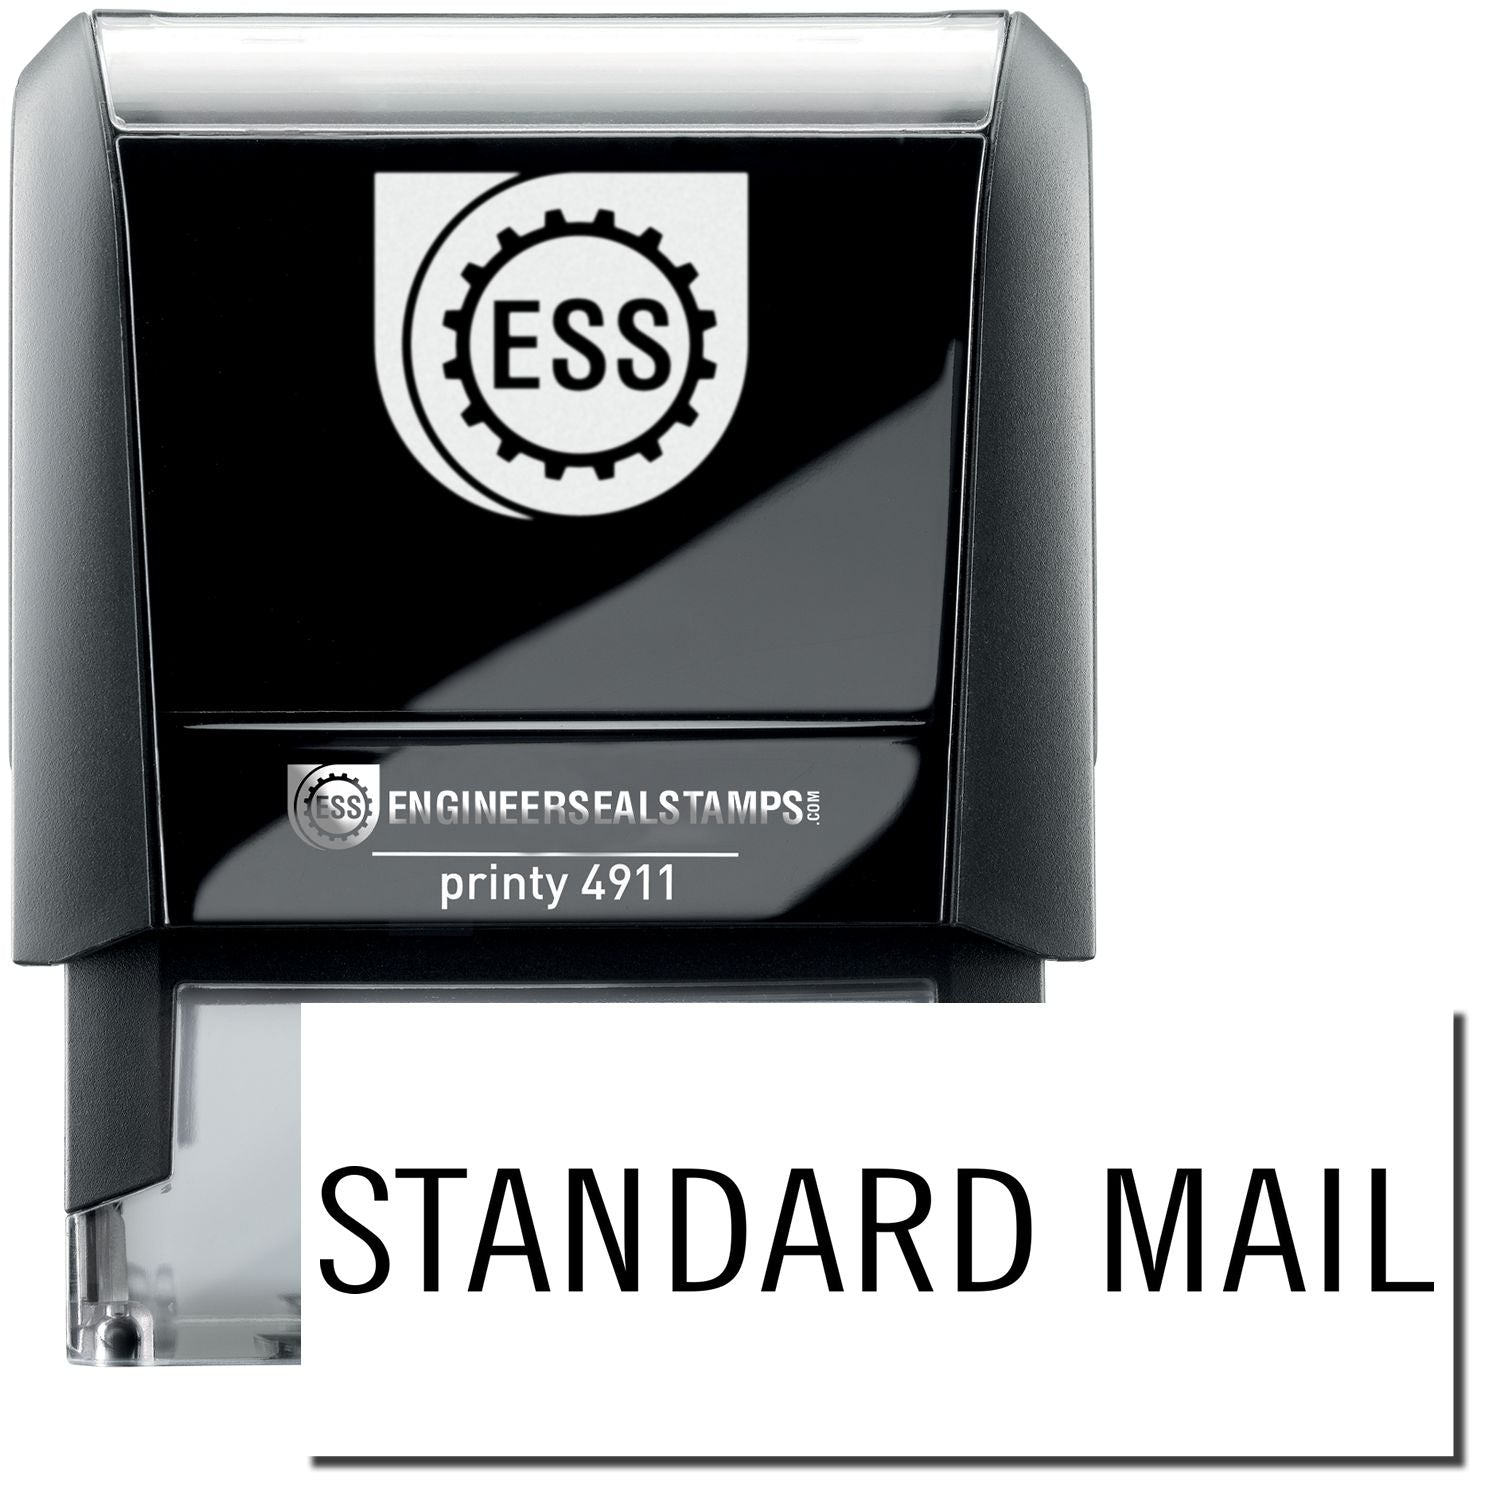 A self-inking stamp with a stamped image showing how the text "STANDARD MAIL" is displayed after stamping.